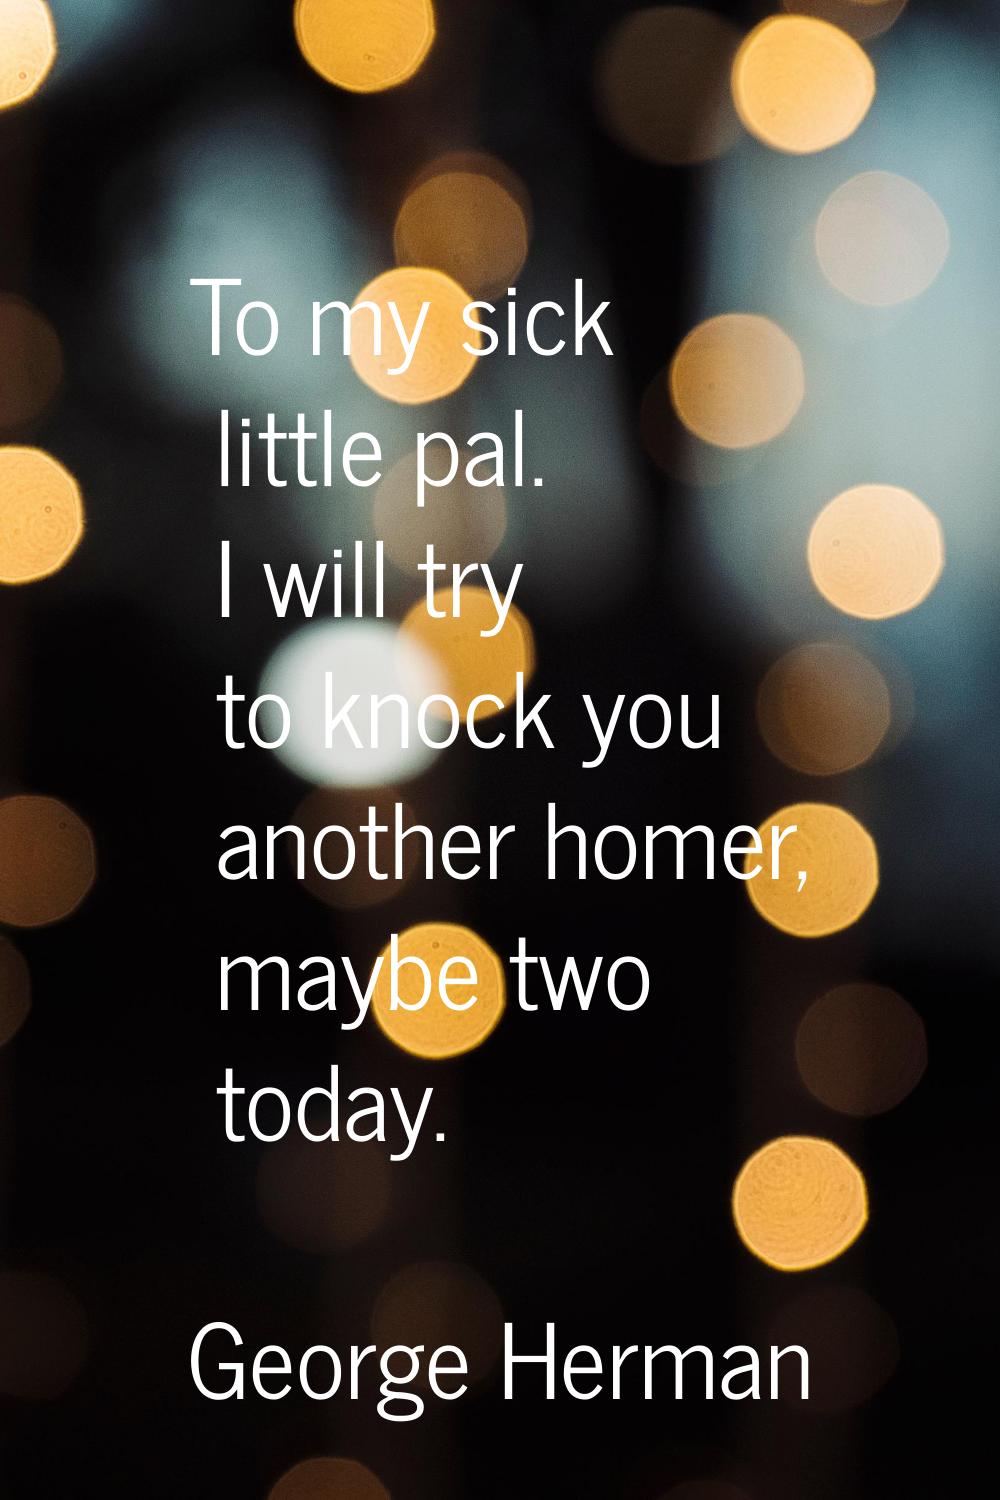 To my sick little pal. I will try to knock you another homer, maybe two today.